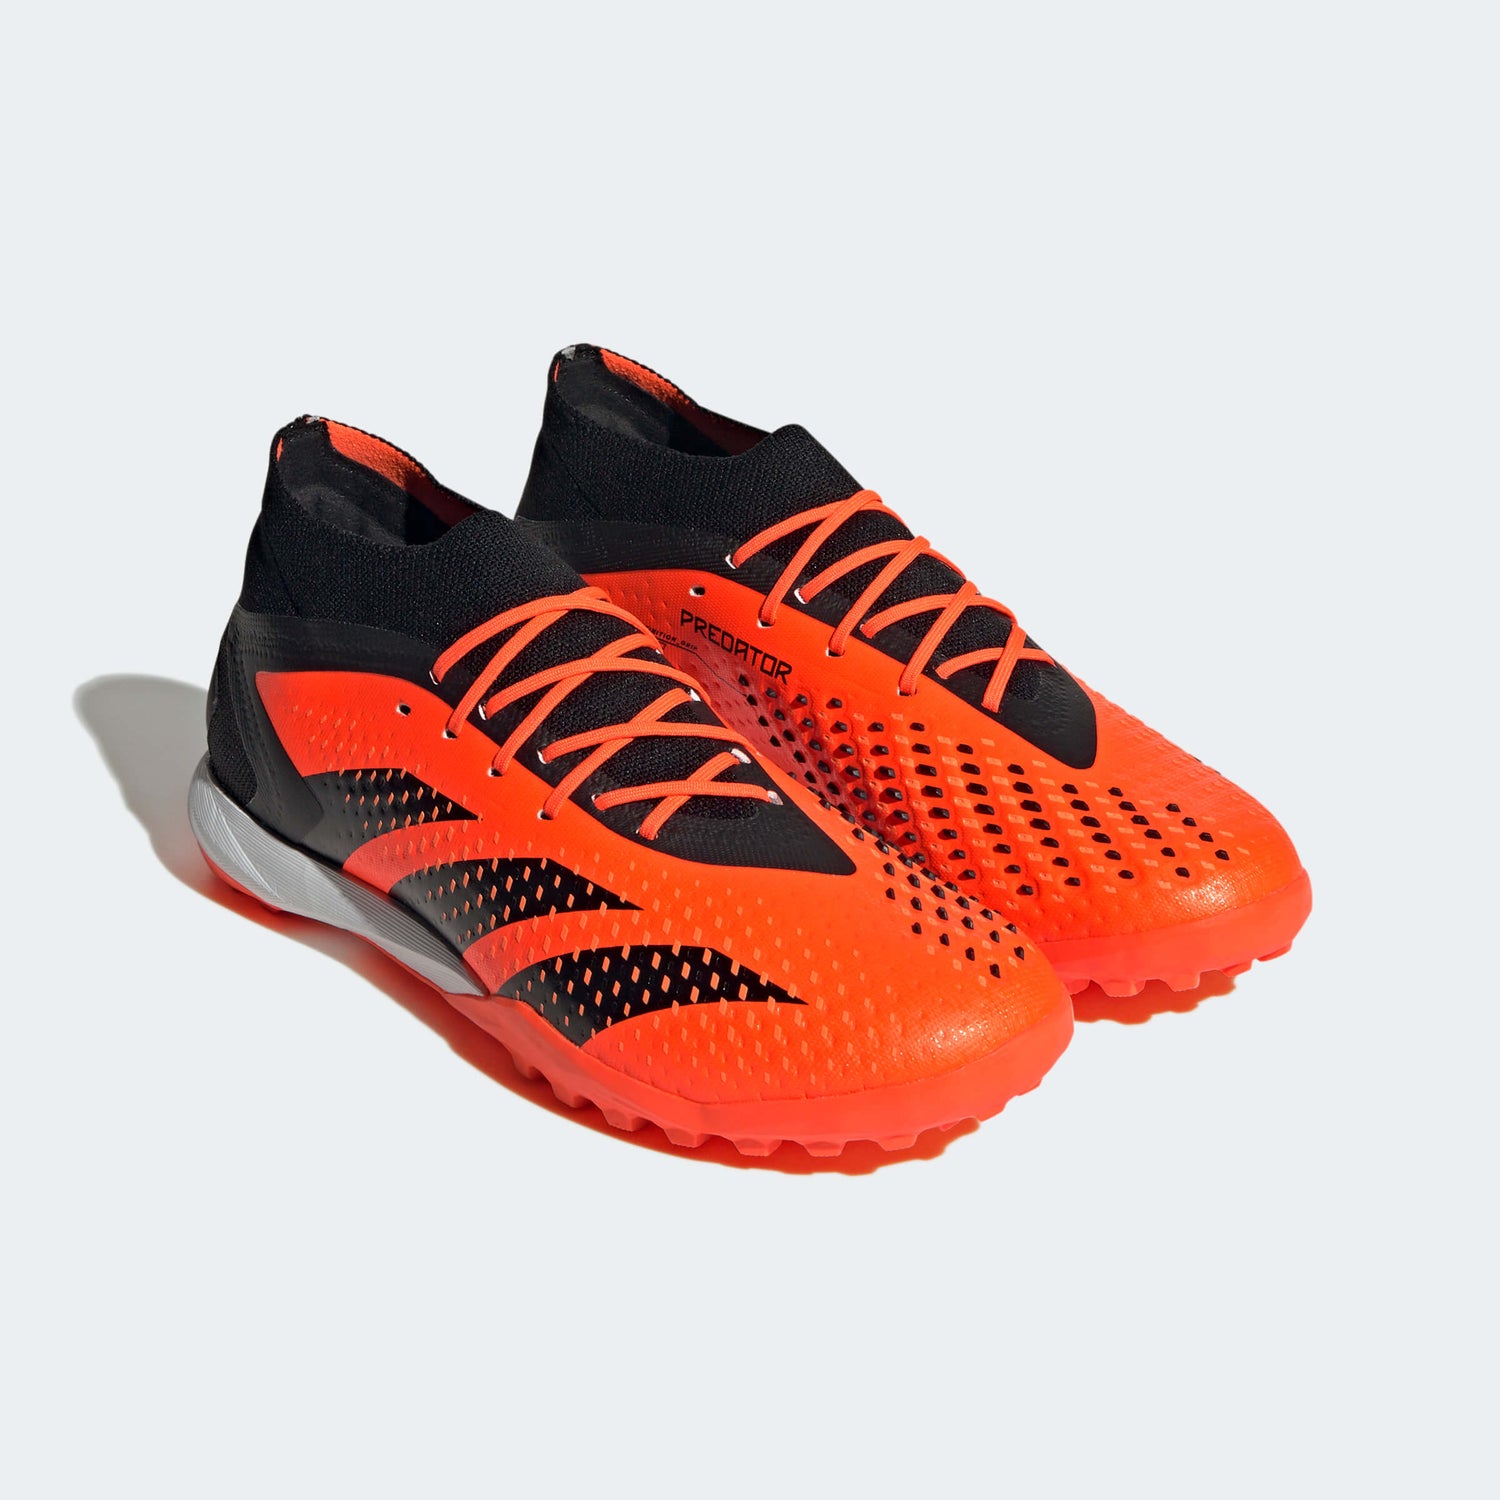 adidas Predator Accuracy.1 Turf - Heatspawn Pack (SP23) (Pair - Front Lateral)